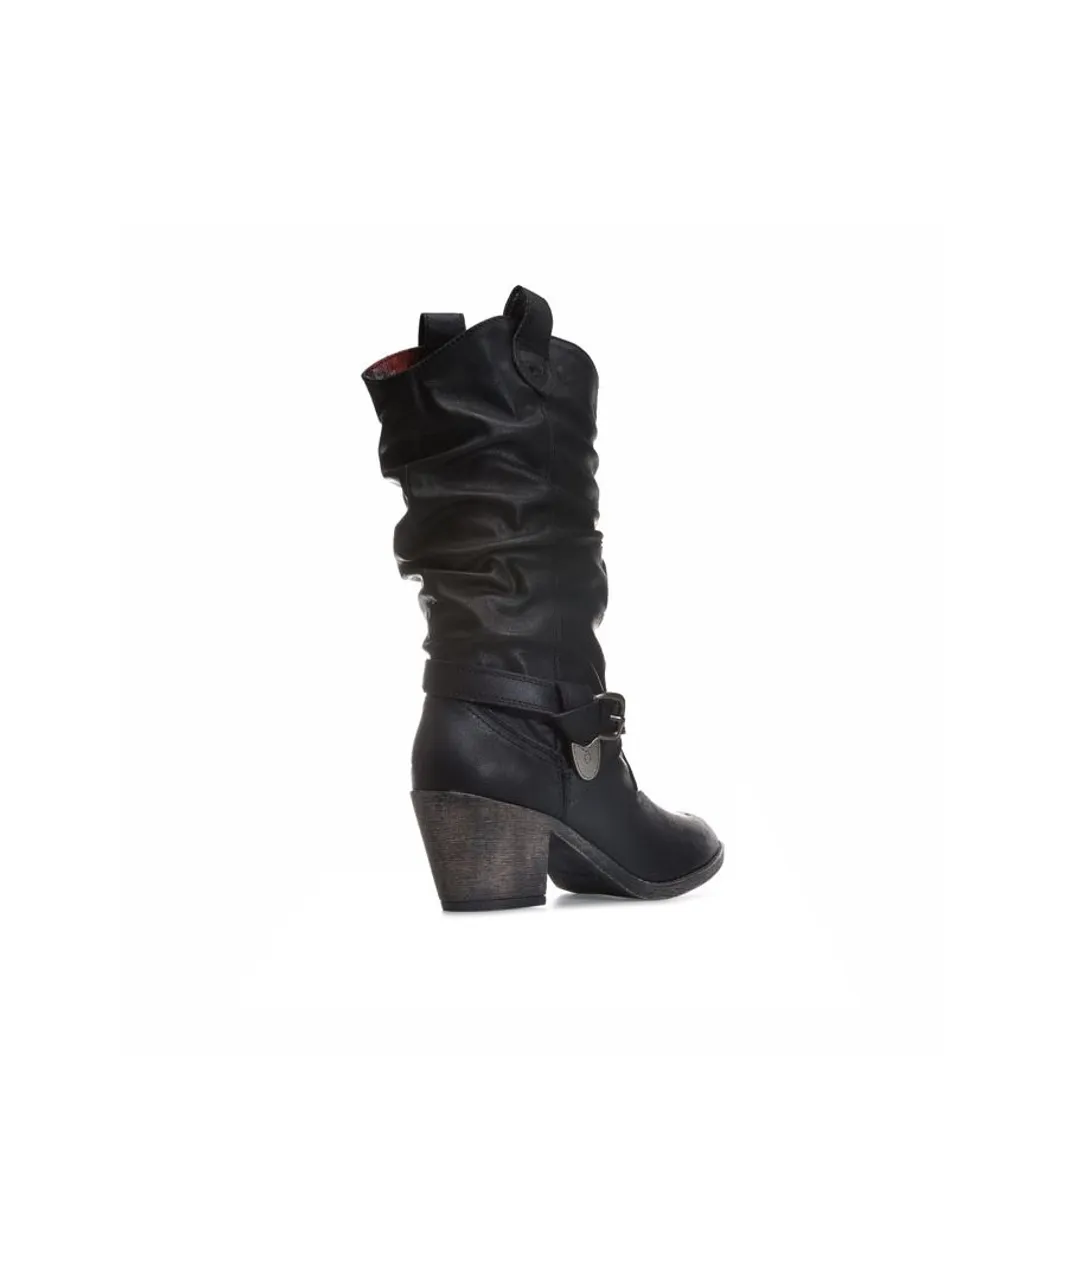 Rocket Dog Womenss Sidestep Lewis Boots in Black